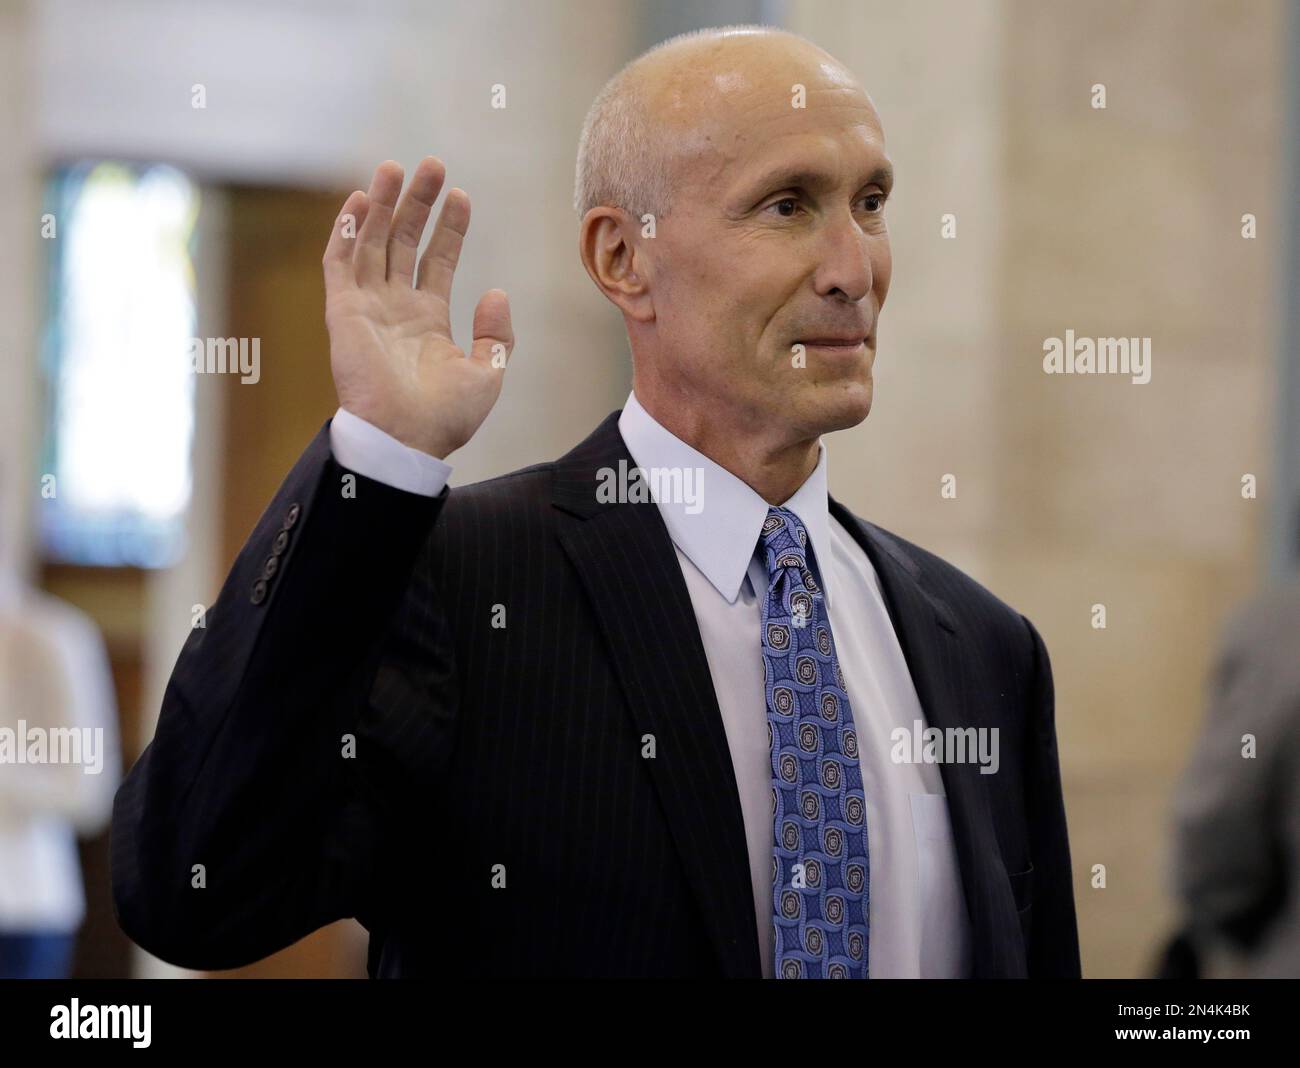 New Jersey Superior Court Judge Lee Solomon is sworn in at the Statehouse,  Monday, June 16, 2014, in Trenton, ., before the Senate Judiciary panel  for a hearing on his nomination to